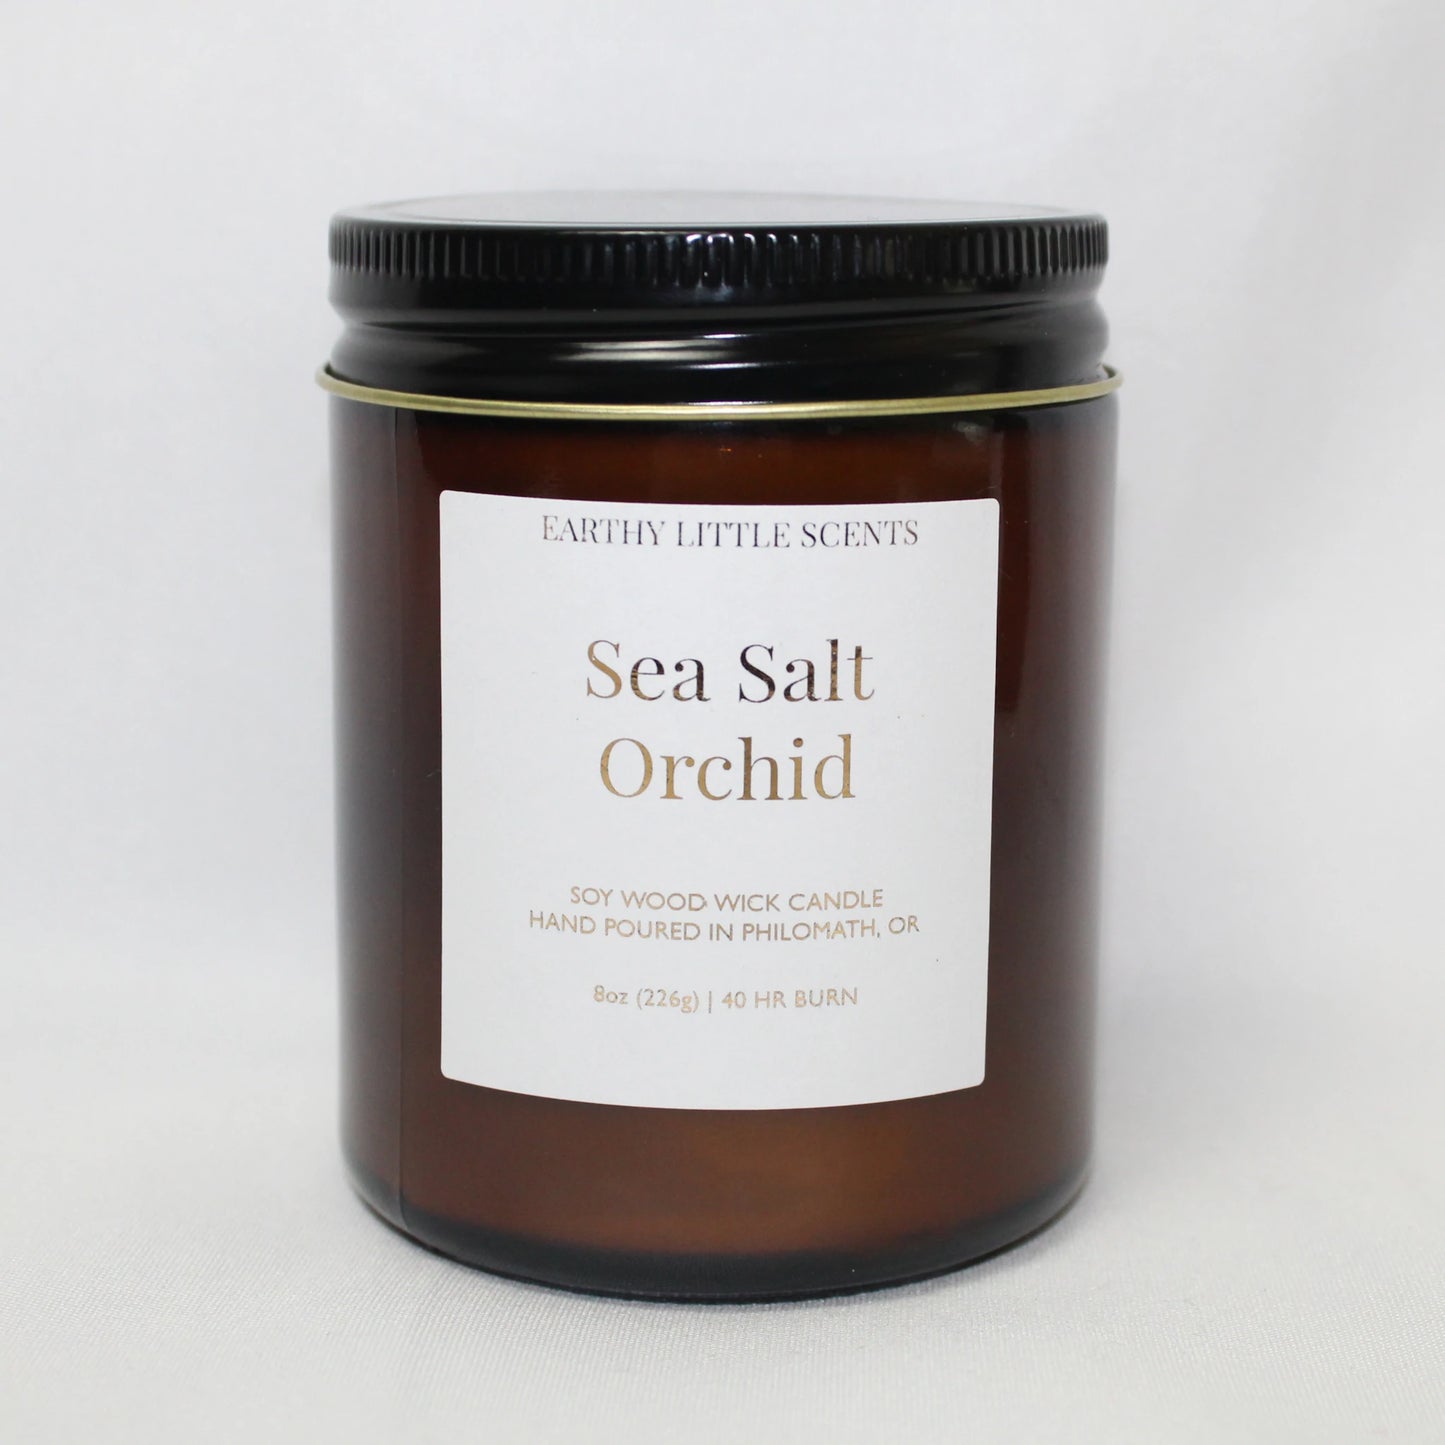 Sea Salt Orchid Soy Wood Wick Candle